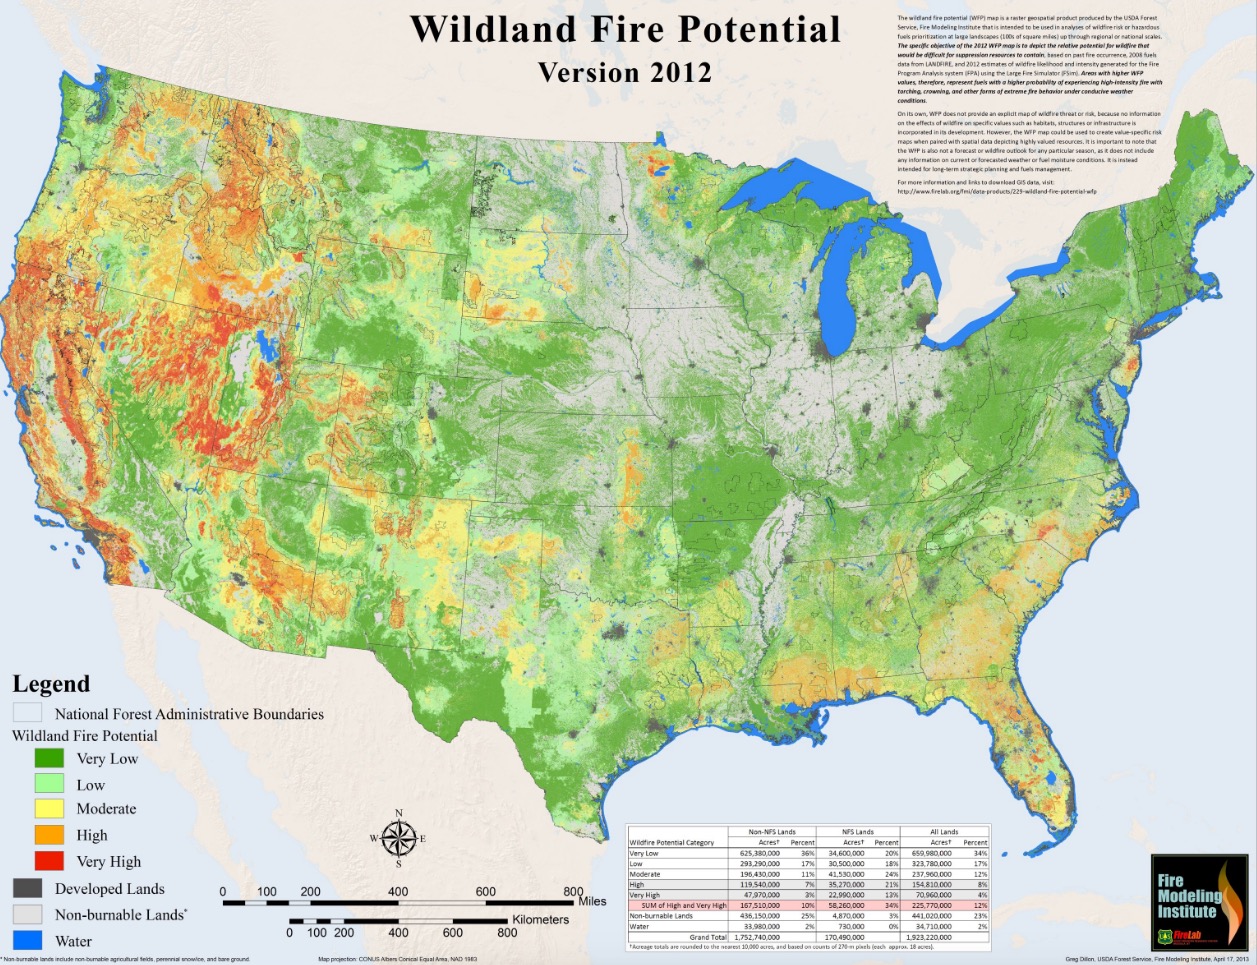 Wildland fire potential in the lower 48 states - Wildfire Today